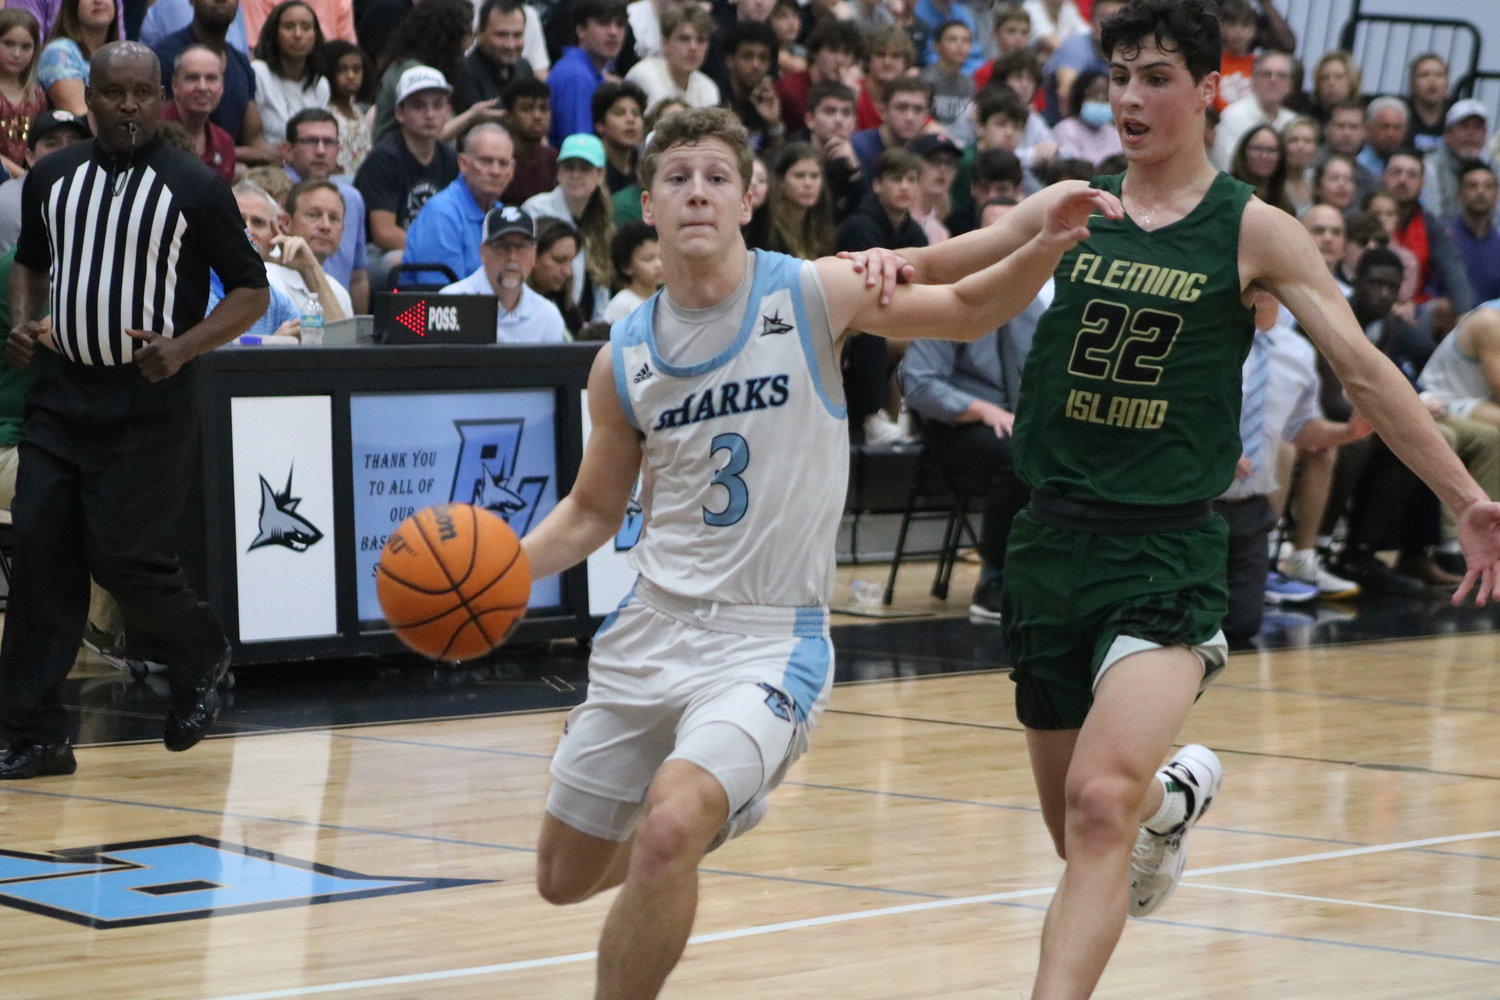 Nate Bunksoky blows by a Fleming Island defender on his way to the basket.